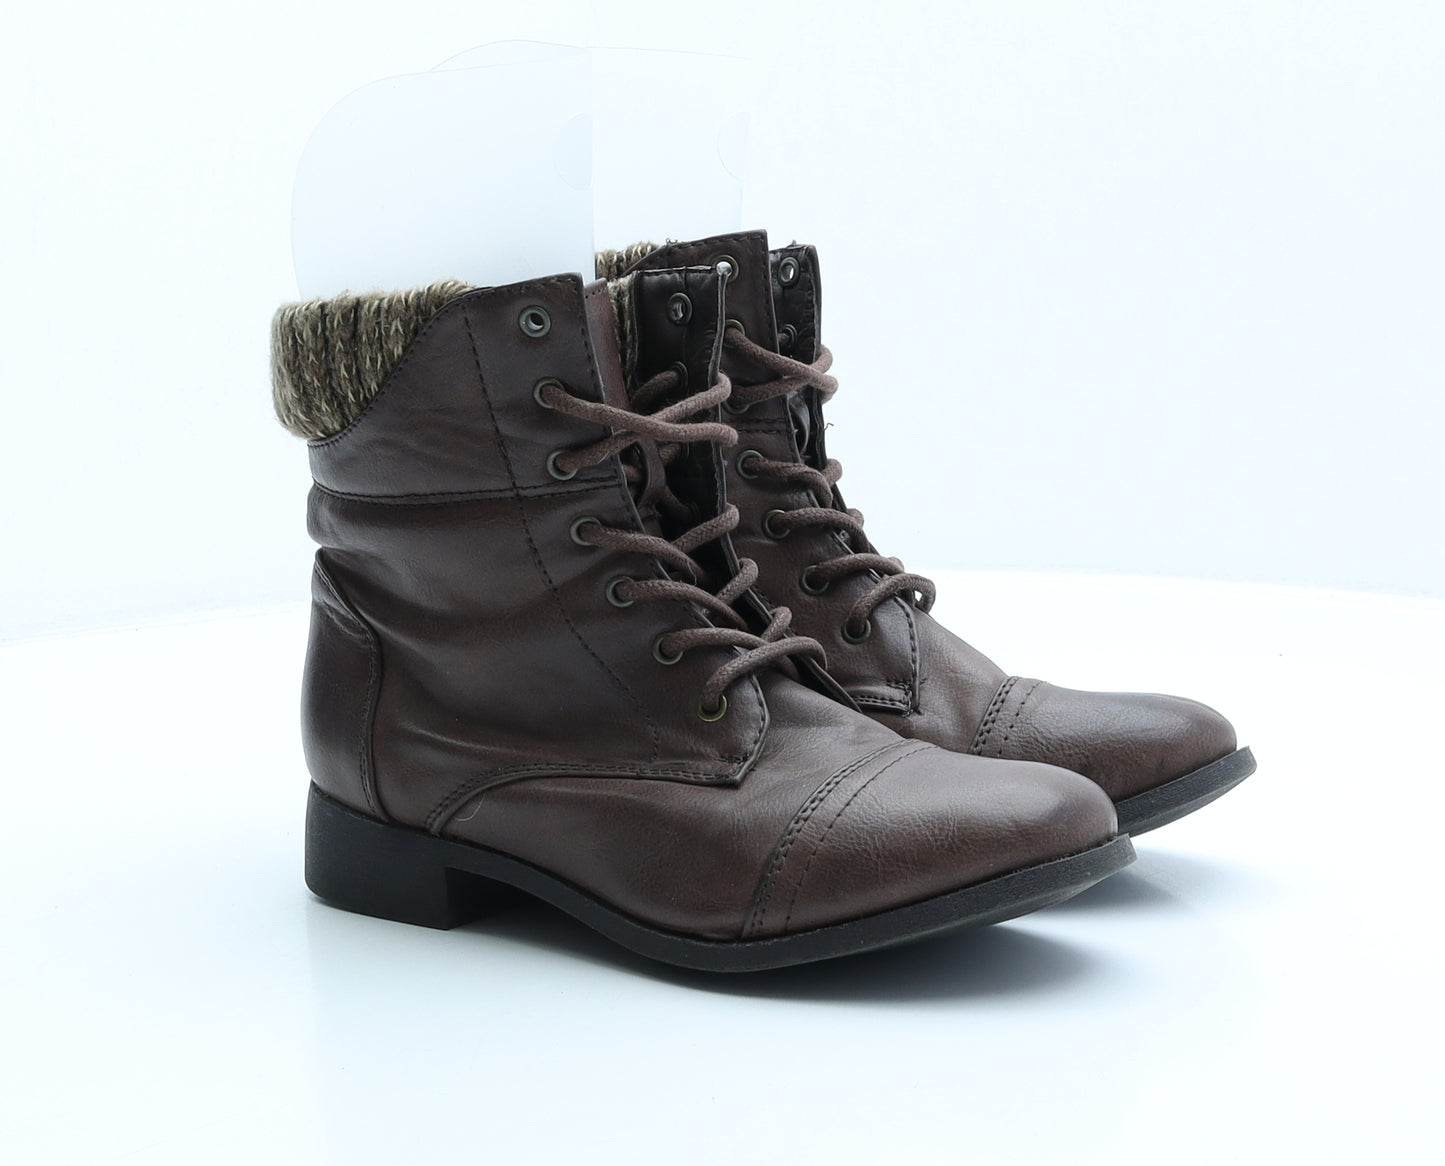 New Look Womens Brown Leather Combat Boot UK 4 37